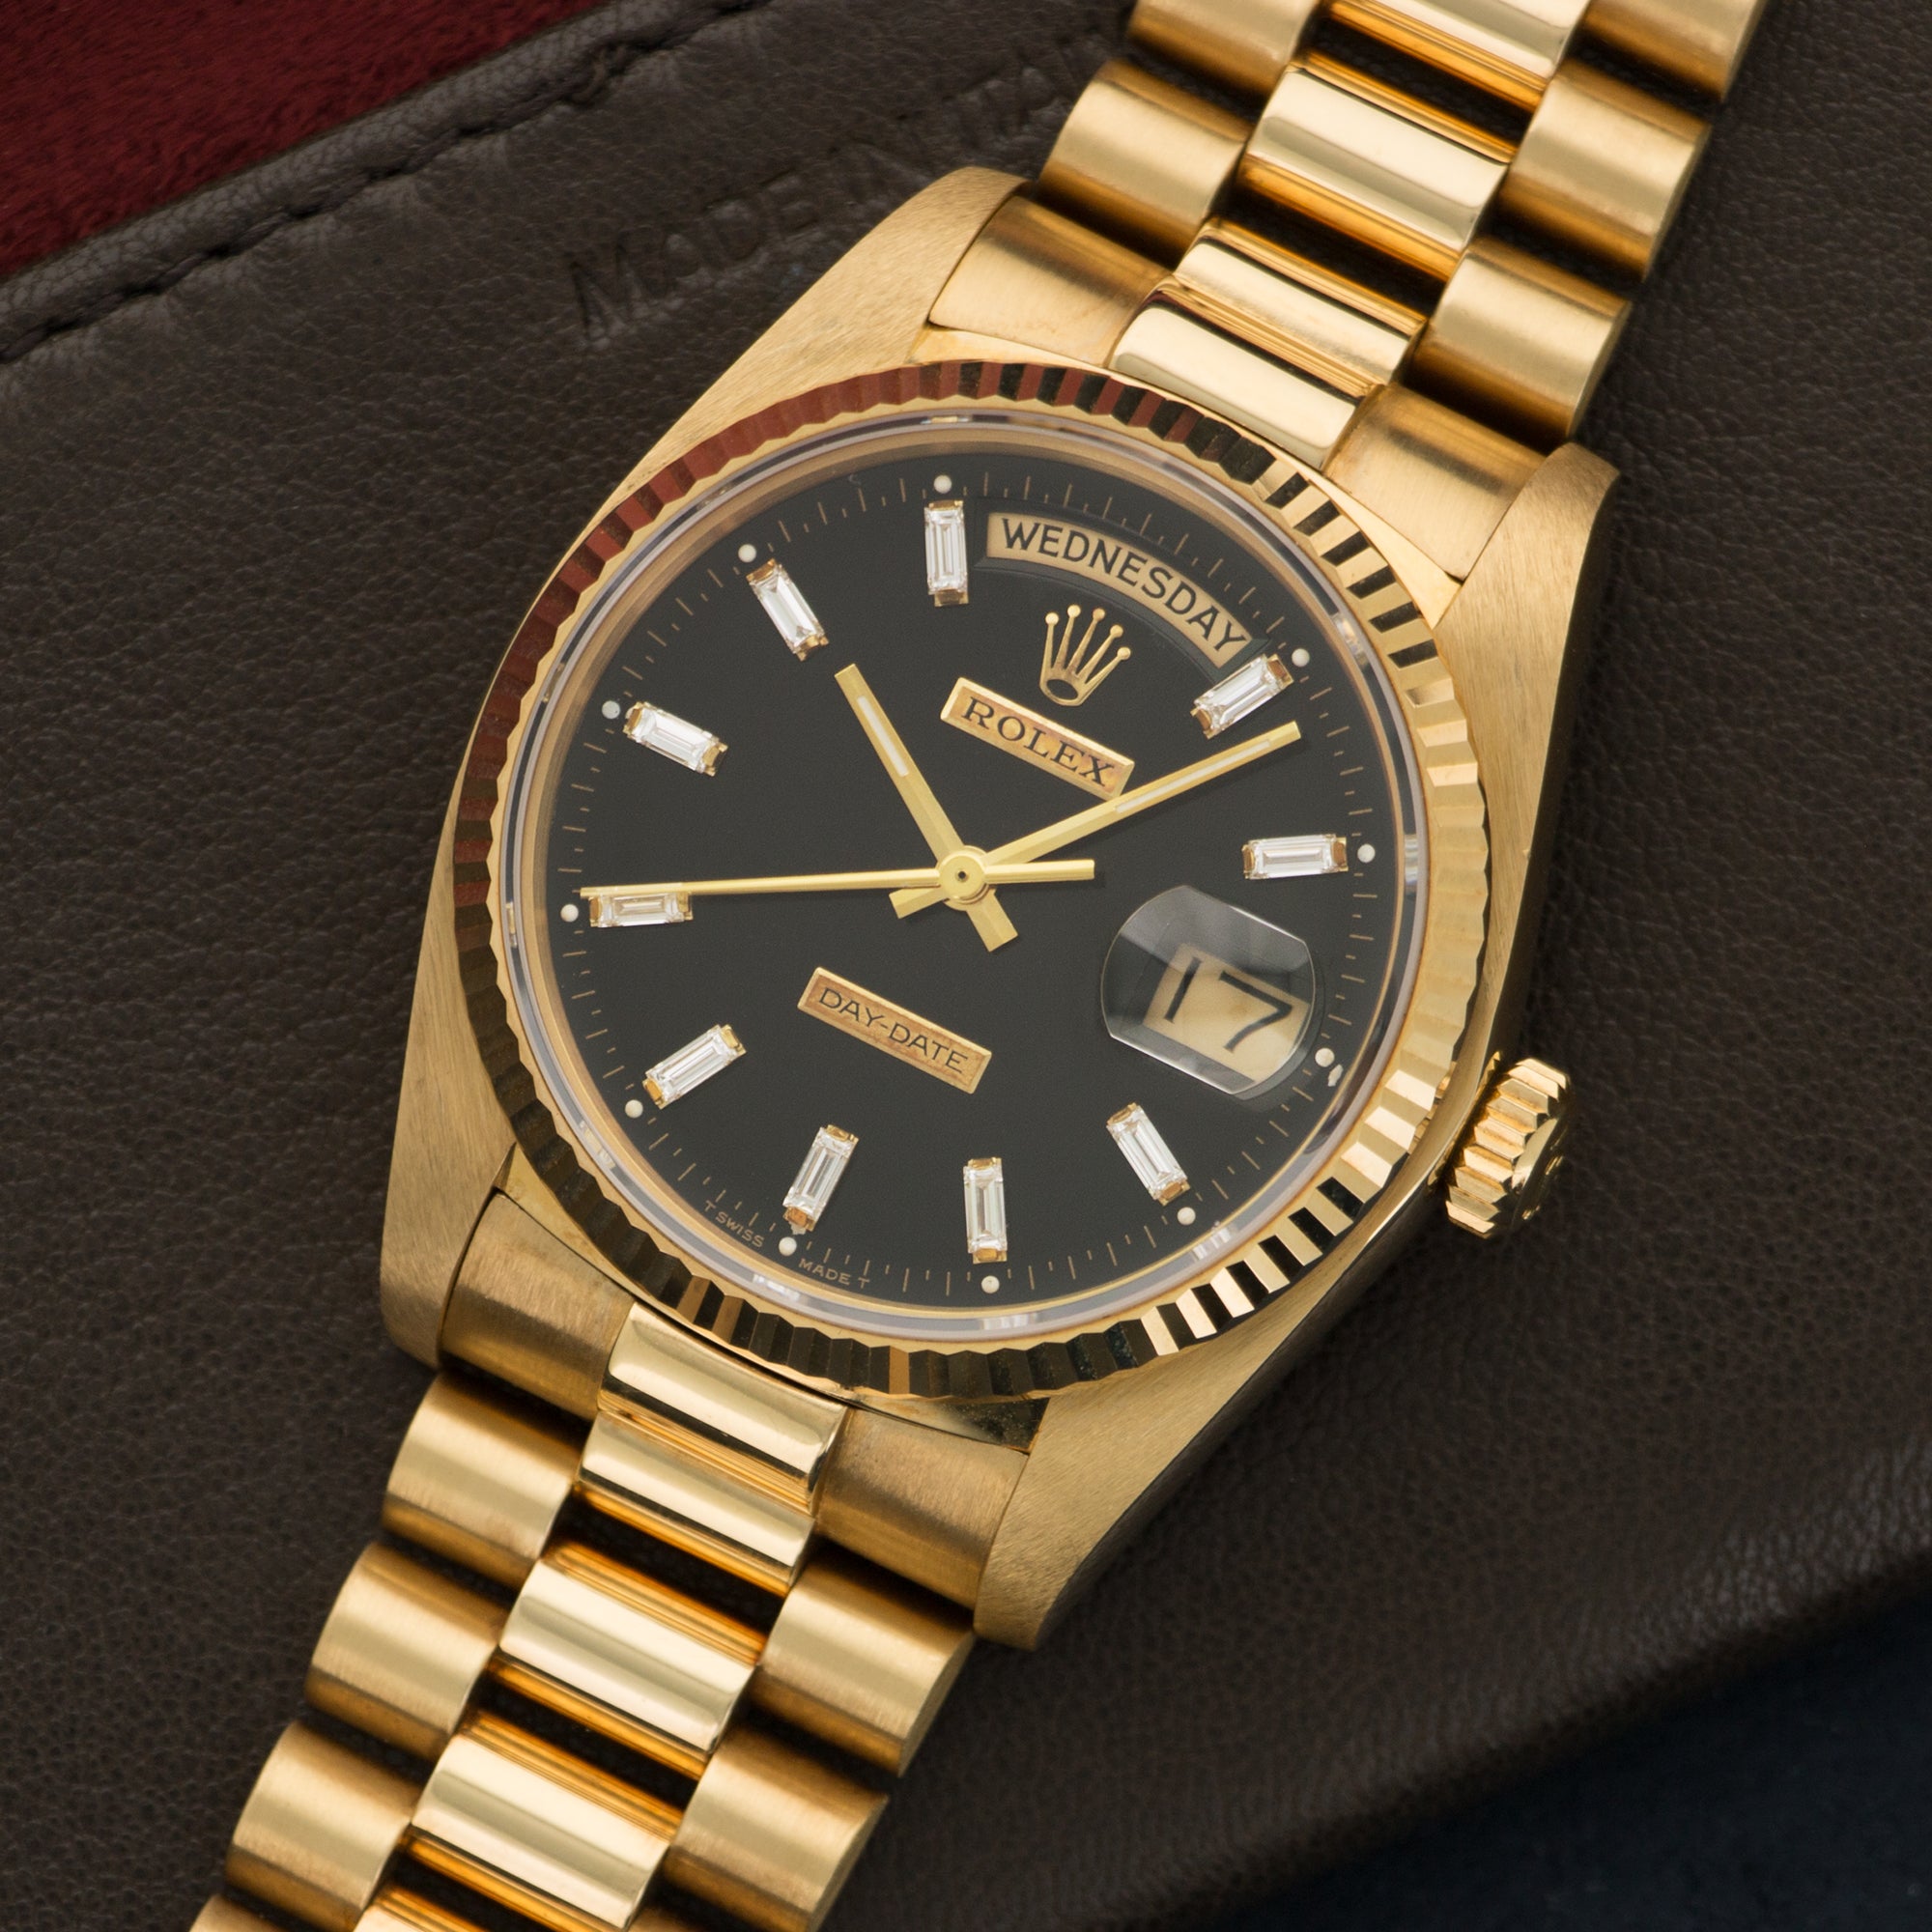 Rolex - Rolex Yellow Gold Day-Date Baguette Diamond Watch- N.O.S. - The Keystone Watches